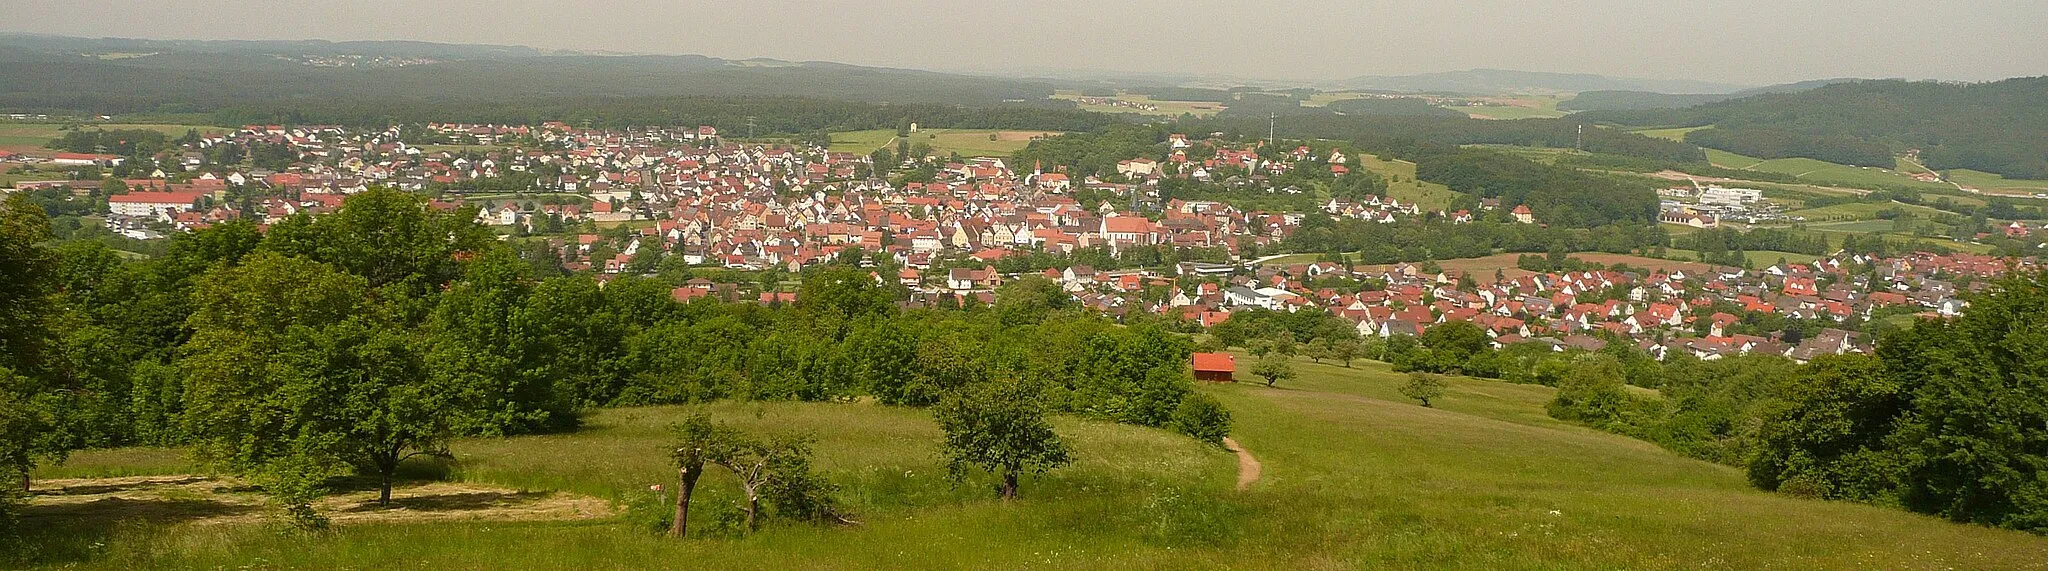 Photo showing: View of Schnaittach, Germany, from the Rothenberg